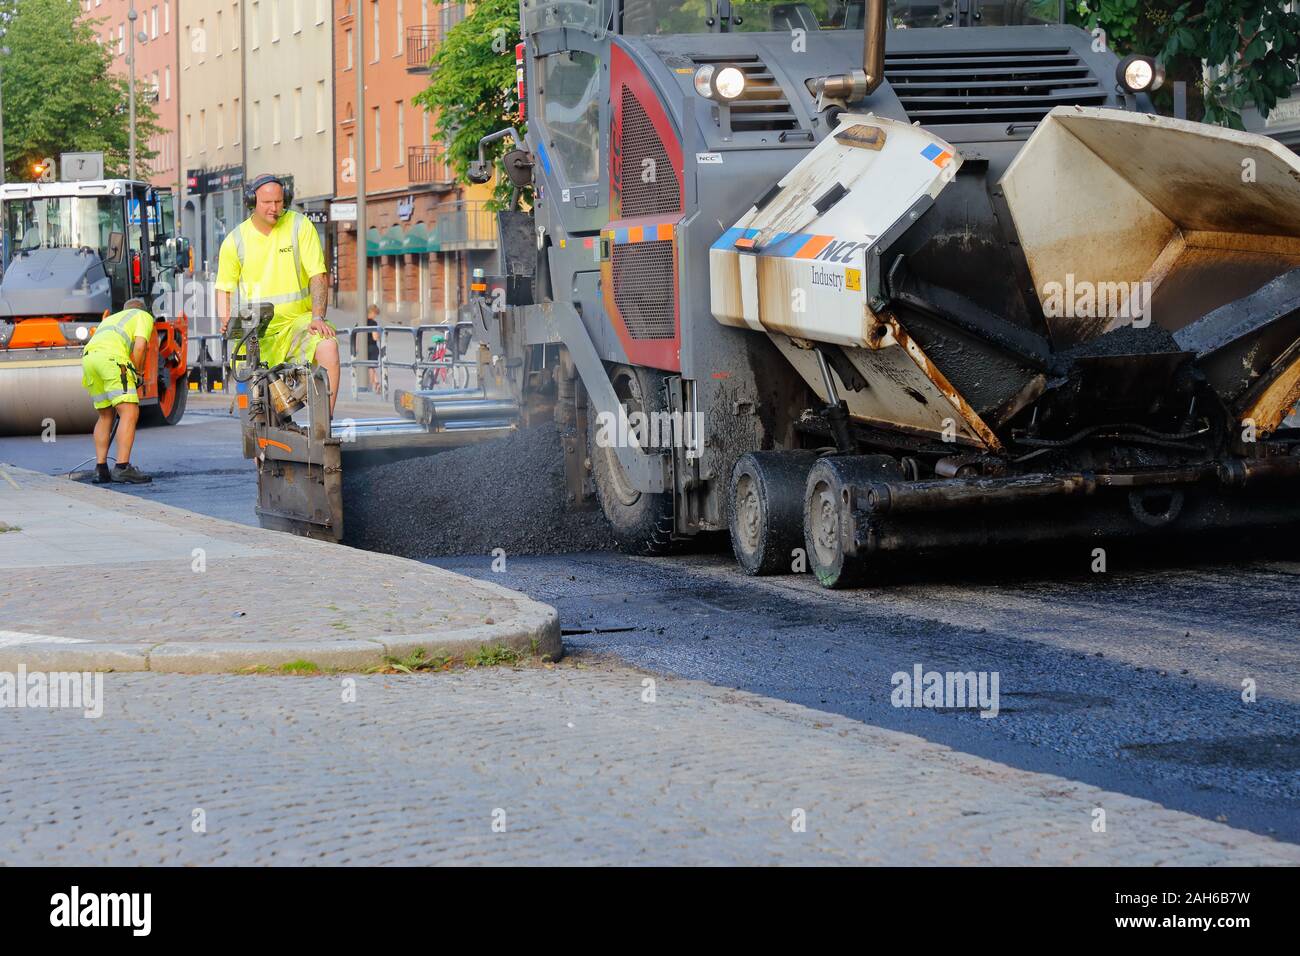 Karlstad, Sweden - June 19, 2019: The construction comapany NCC laying asphalt in the city center. Stock Photo